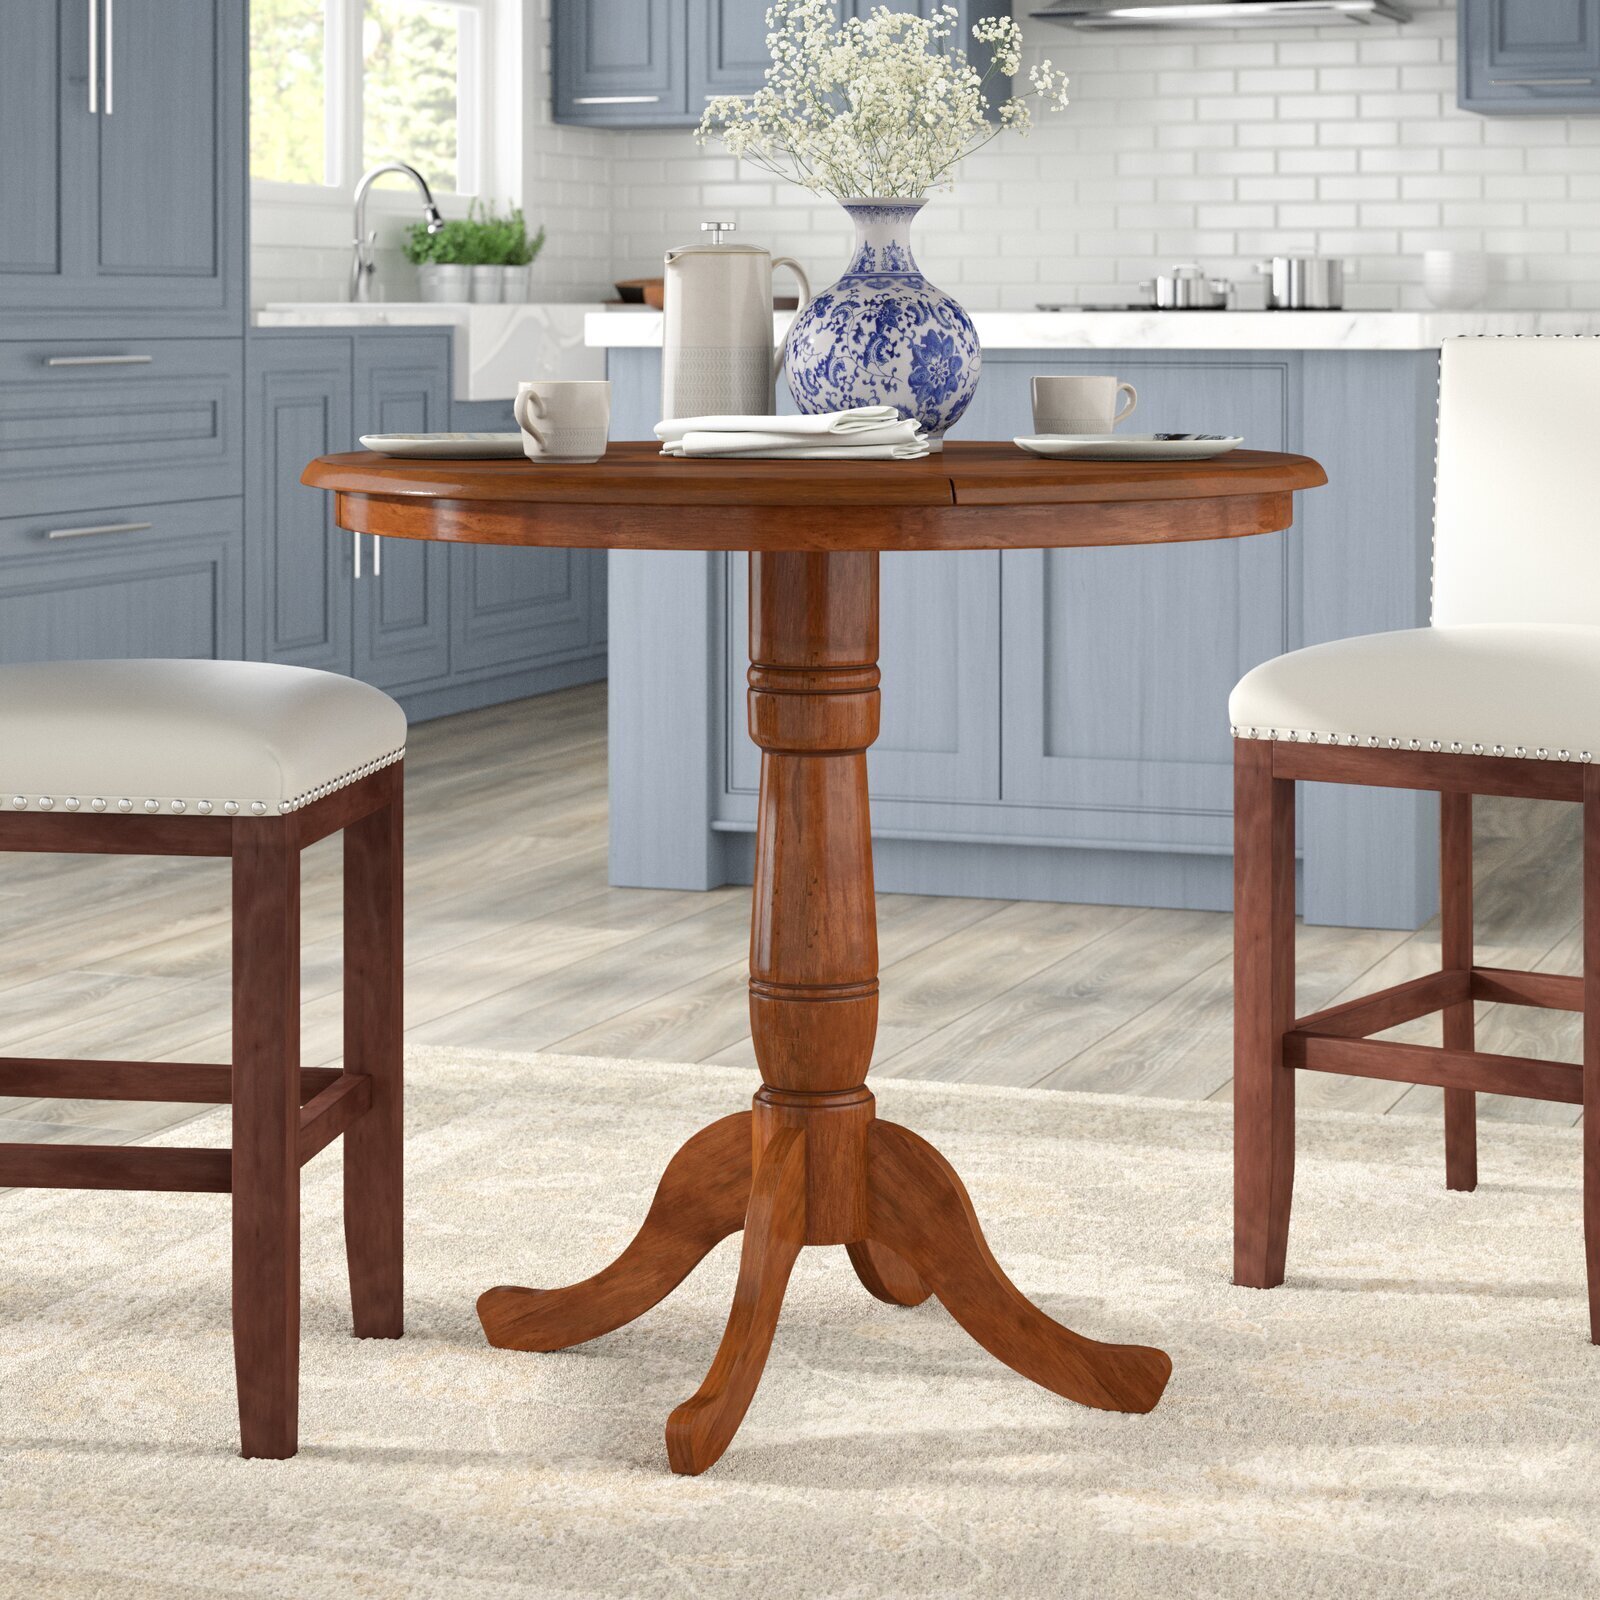 Counter Height Round Table With Extension Leaf